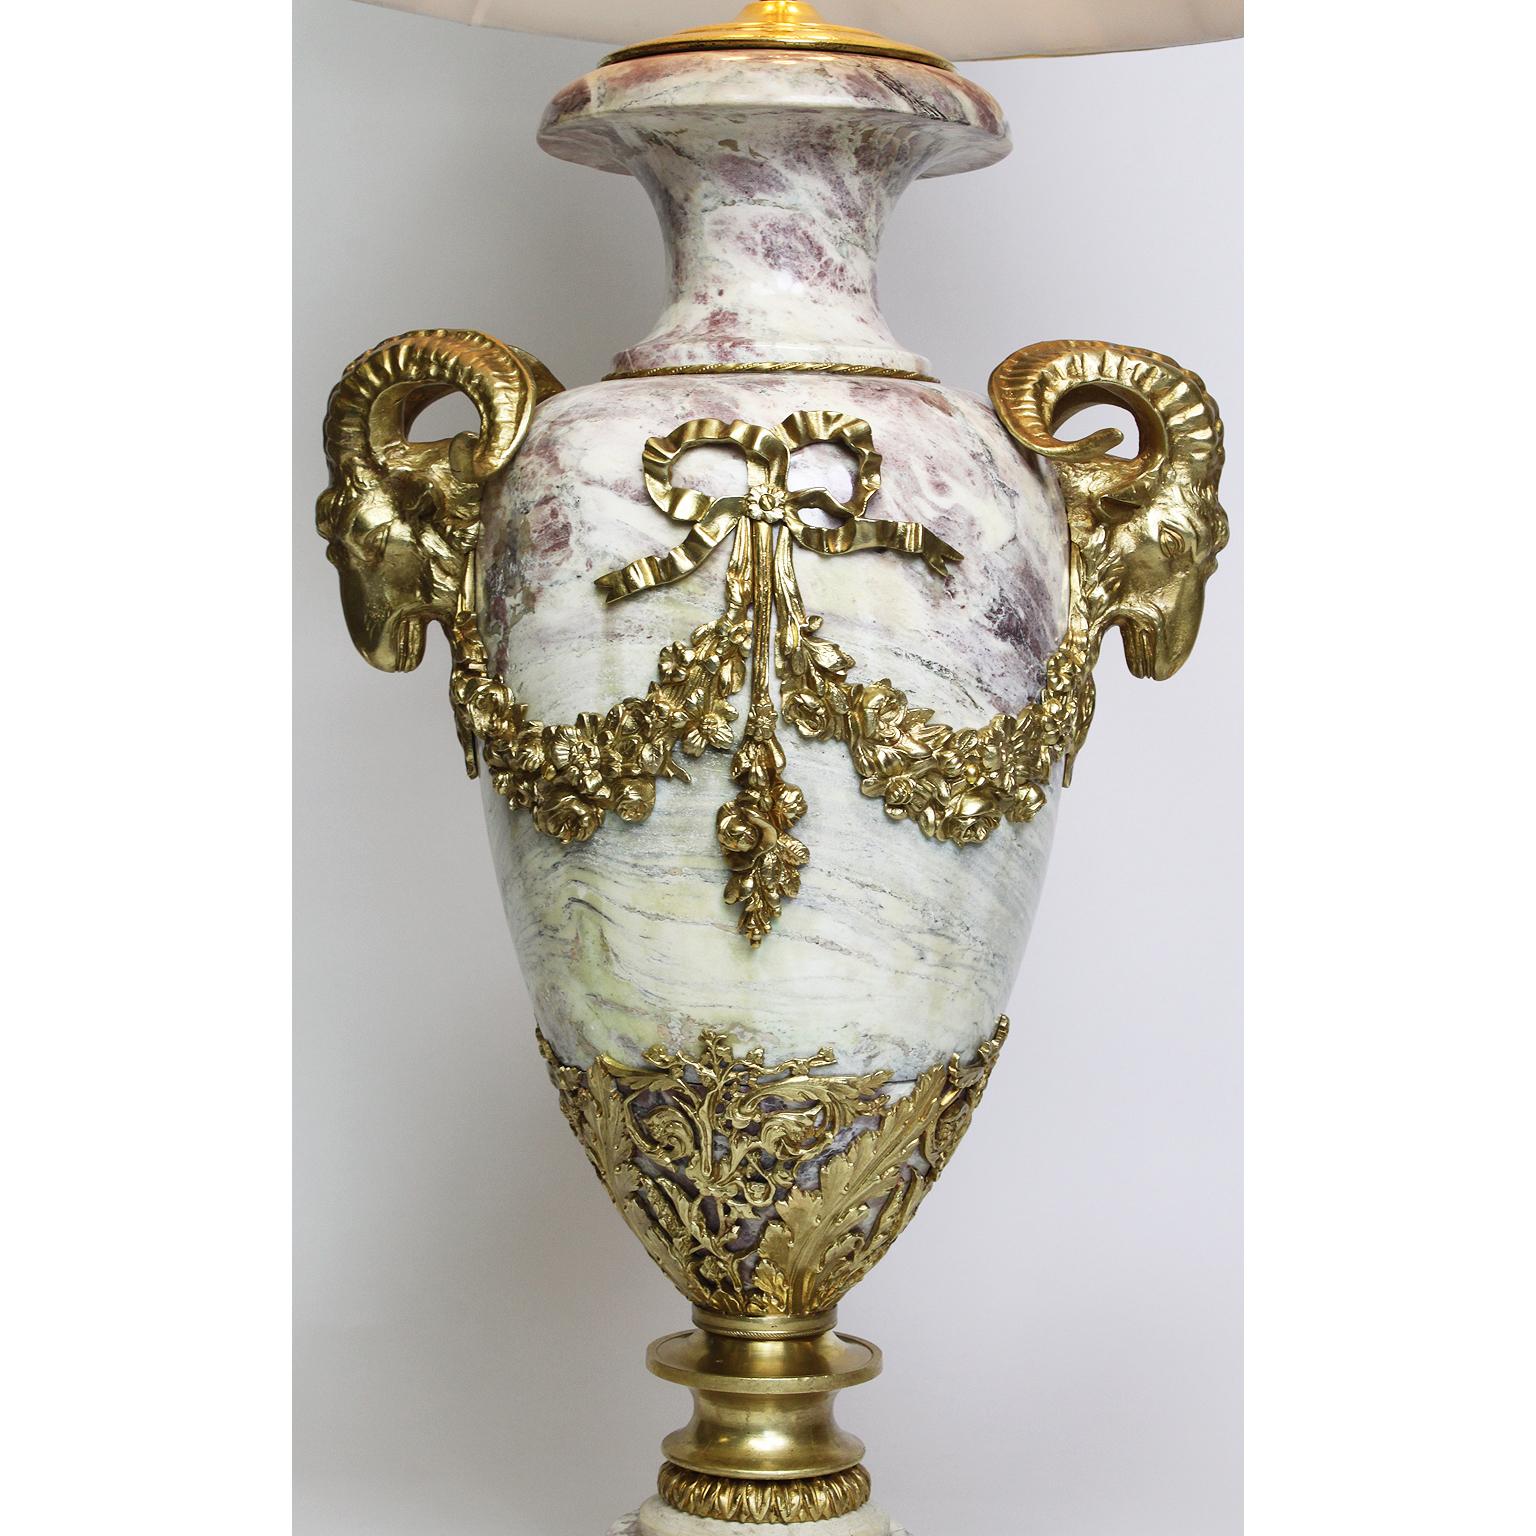 Early 20th Century French 19th-20th Century Louis XV Style Marble and Gilt Bronze-Mounted Urn Lamp For Sale